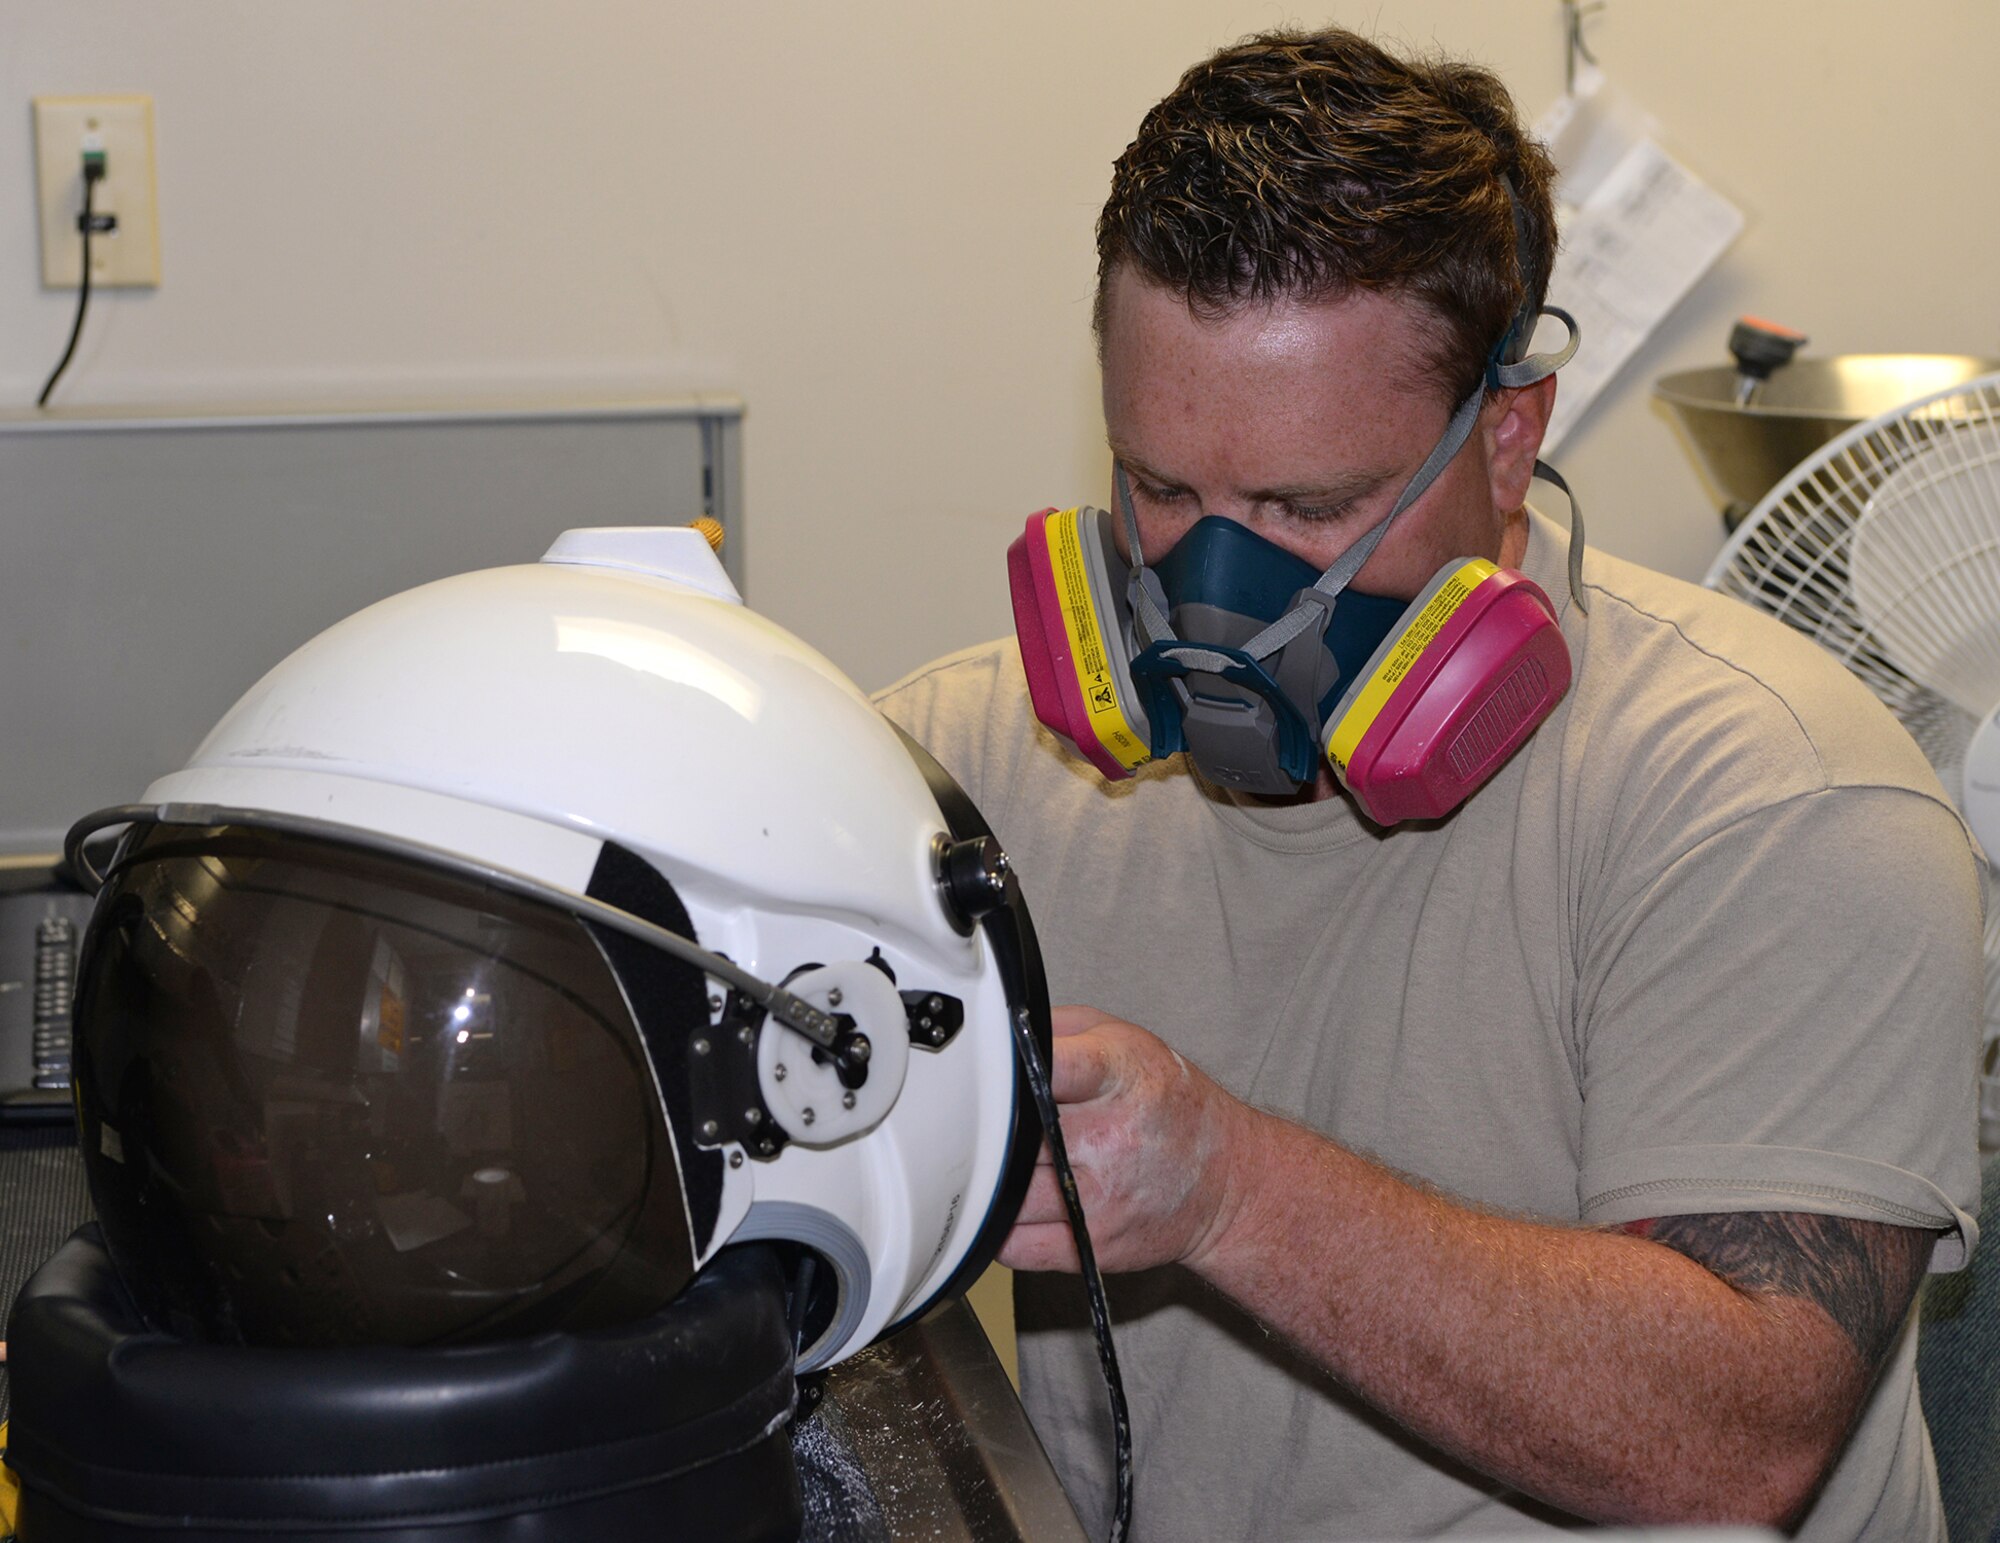 Senior Airman Mason Wyman, 9th Physiological Support Squadron full pressure suit technician, glues a face seal in the helmet Aug. 31, 2016, at Beale Air Force Base, California. The helmet provides the pilot with oxygen and keeps the pressure around the pilot's head stable. (U.S. Air Force photo/Airman Tristan D. Viglianco)